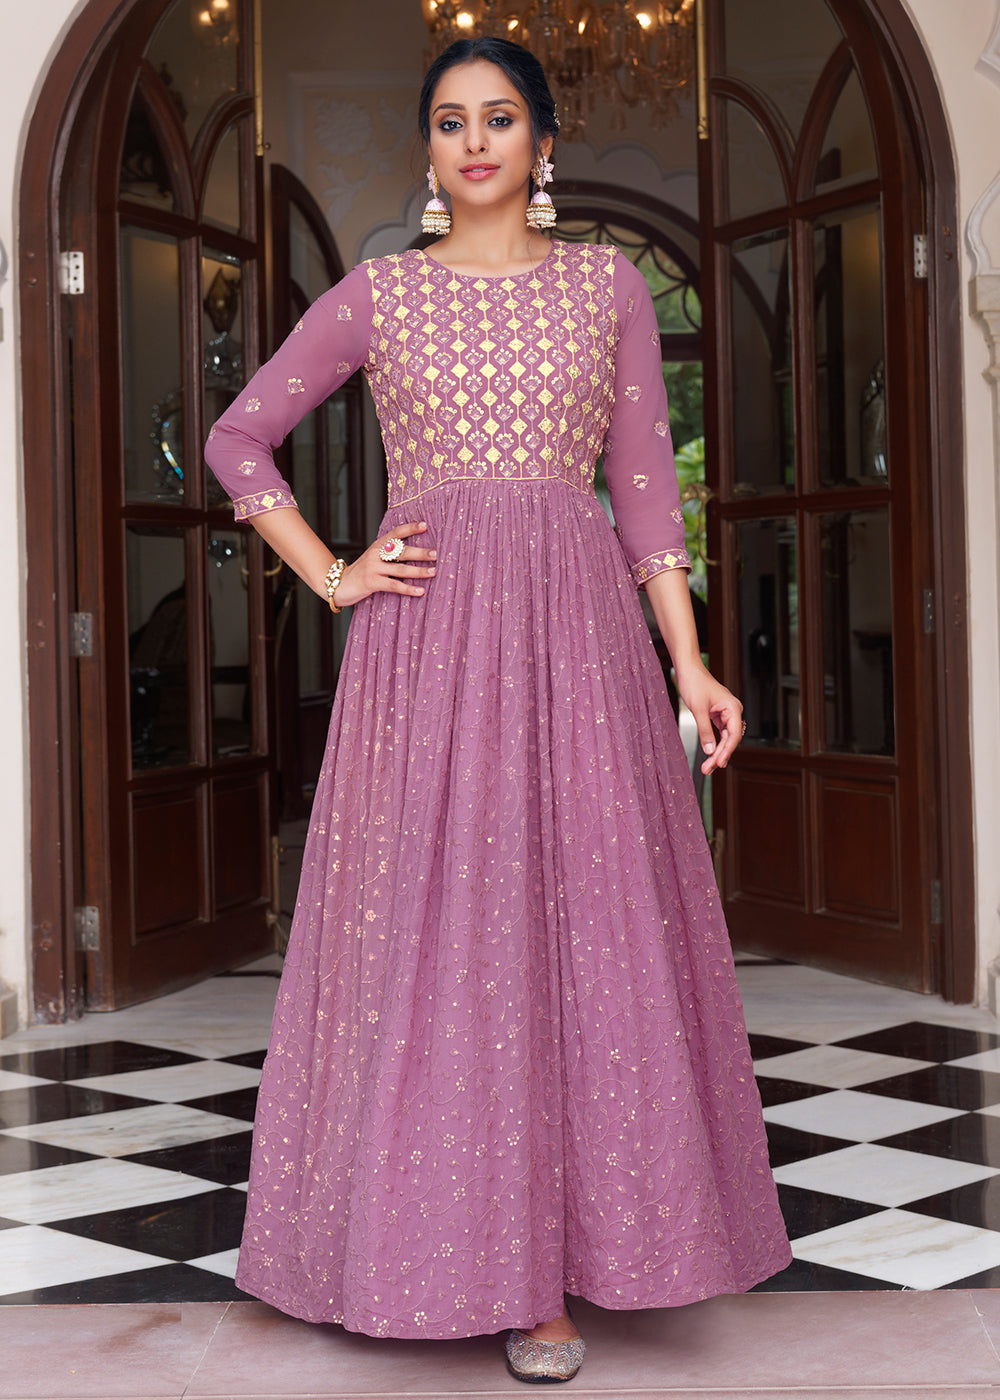 Buy Now Embroidered Pink Lavender Function Wear Anarkali Gown Online in USA, UK, Australia, New Zealand, Canada, Italy & Worldwide at Empress Clothing. 